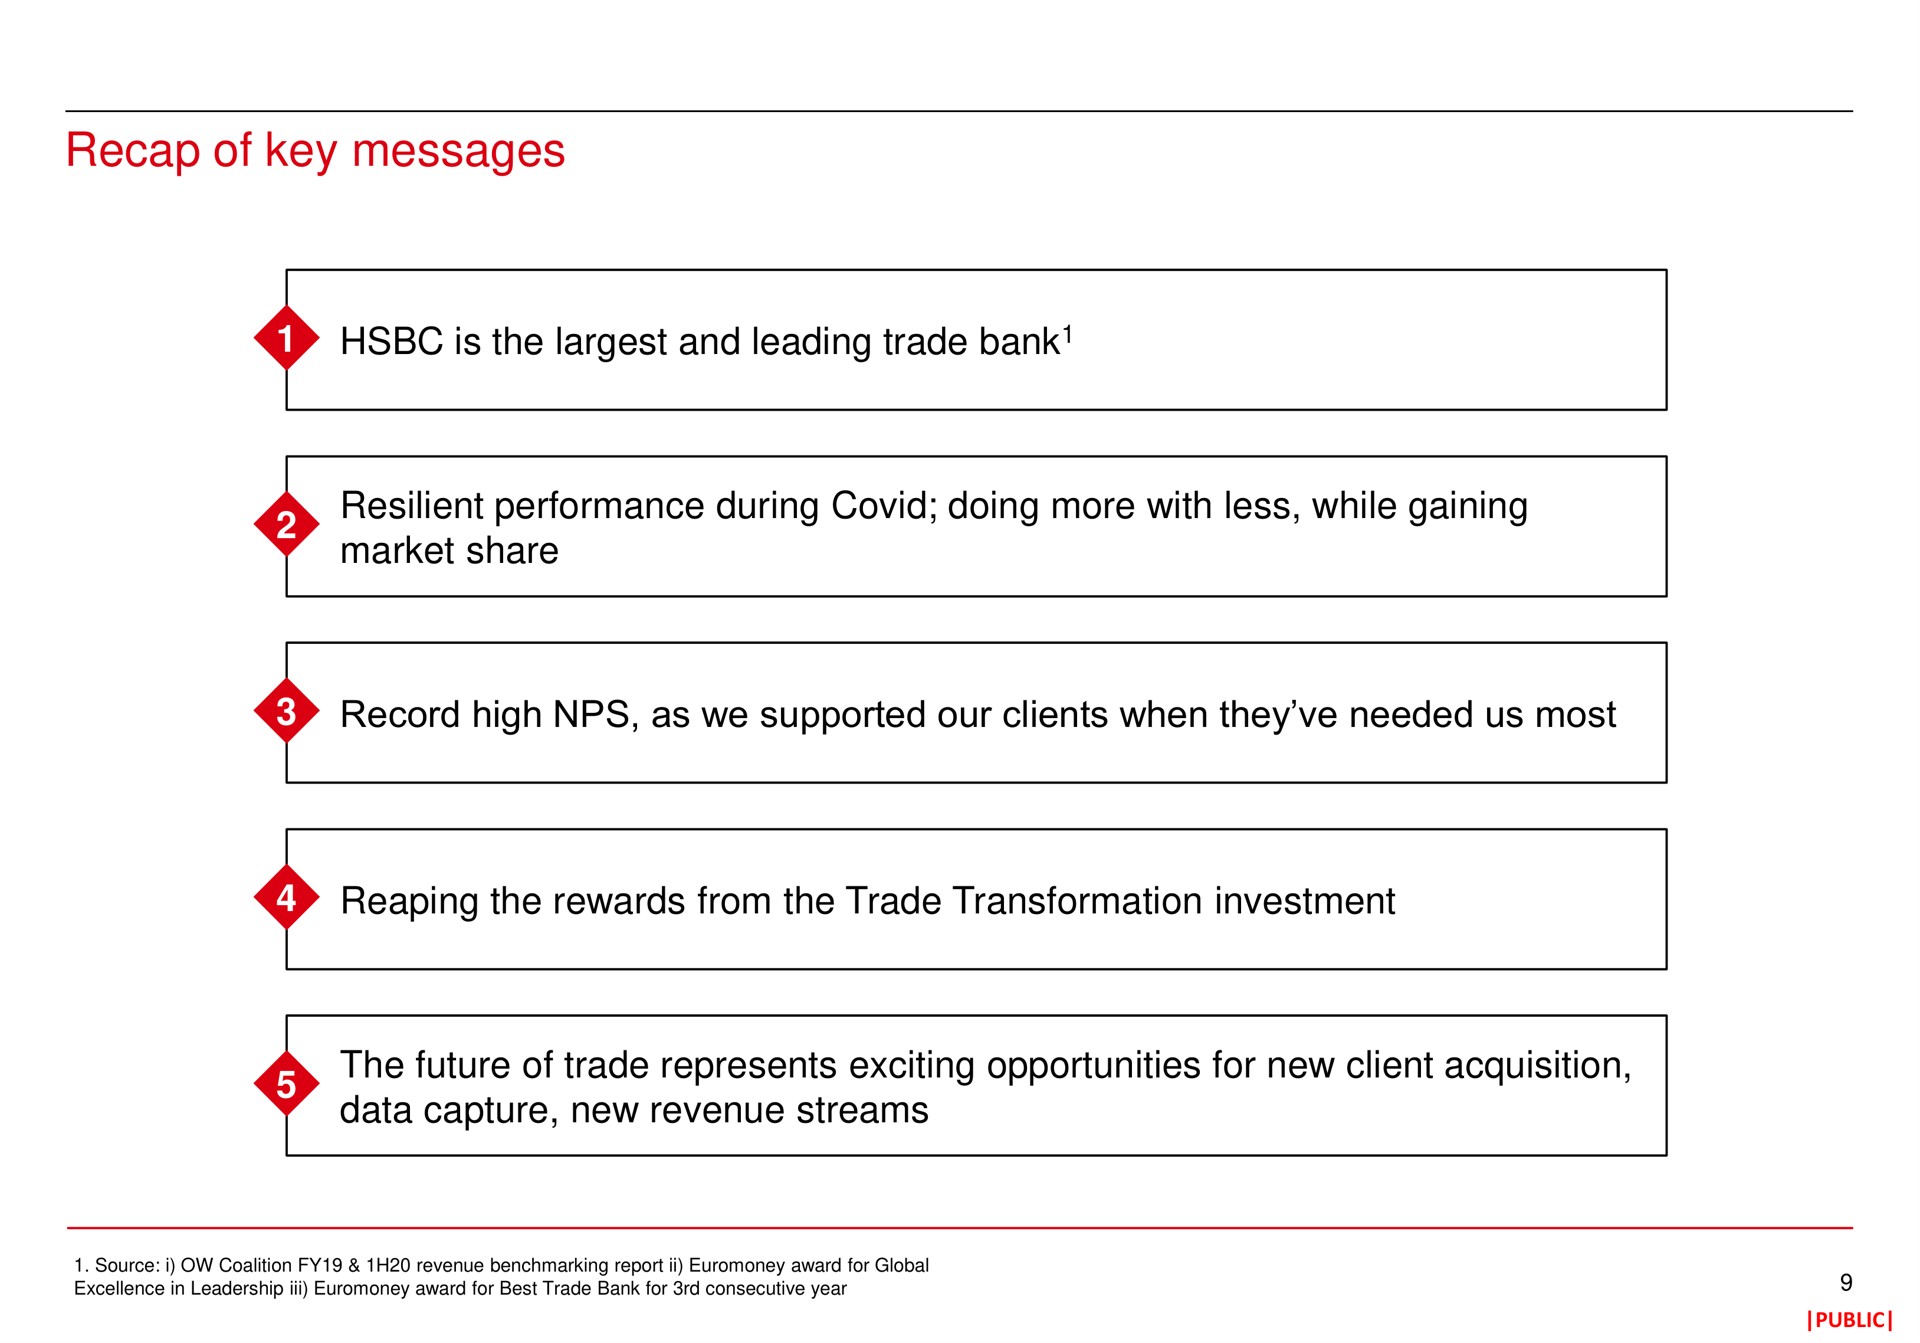 recap of key messages is the and leading trade bank resilient performance during covid doing more with less while gaining market share record high as we supported our clients when they needed us most reaping the rewards from the trade transformation investment the future of trade represents exciting opportunities for new client acquisition data capture new revenue streams bank | HSBC